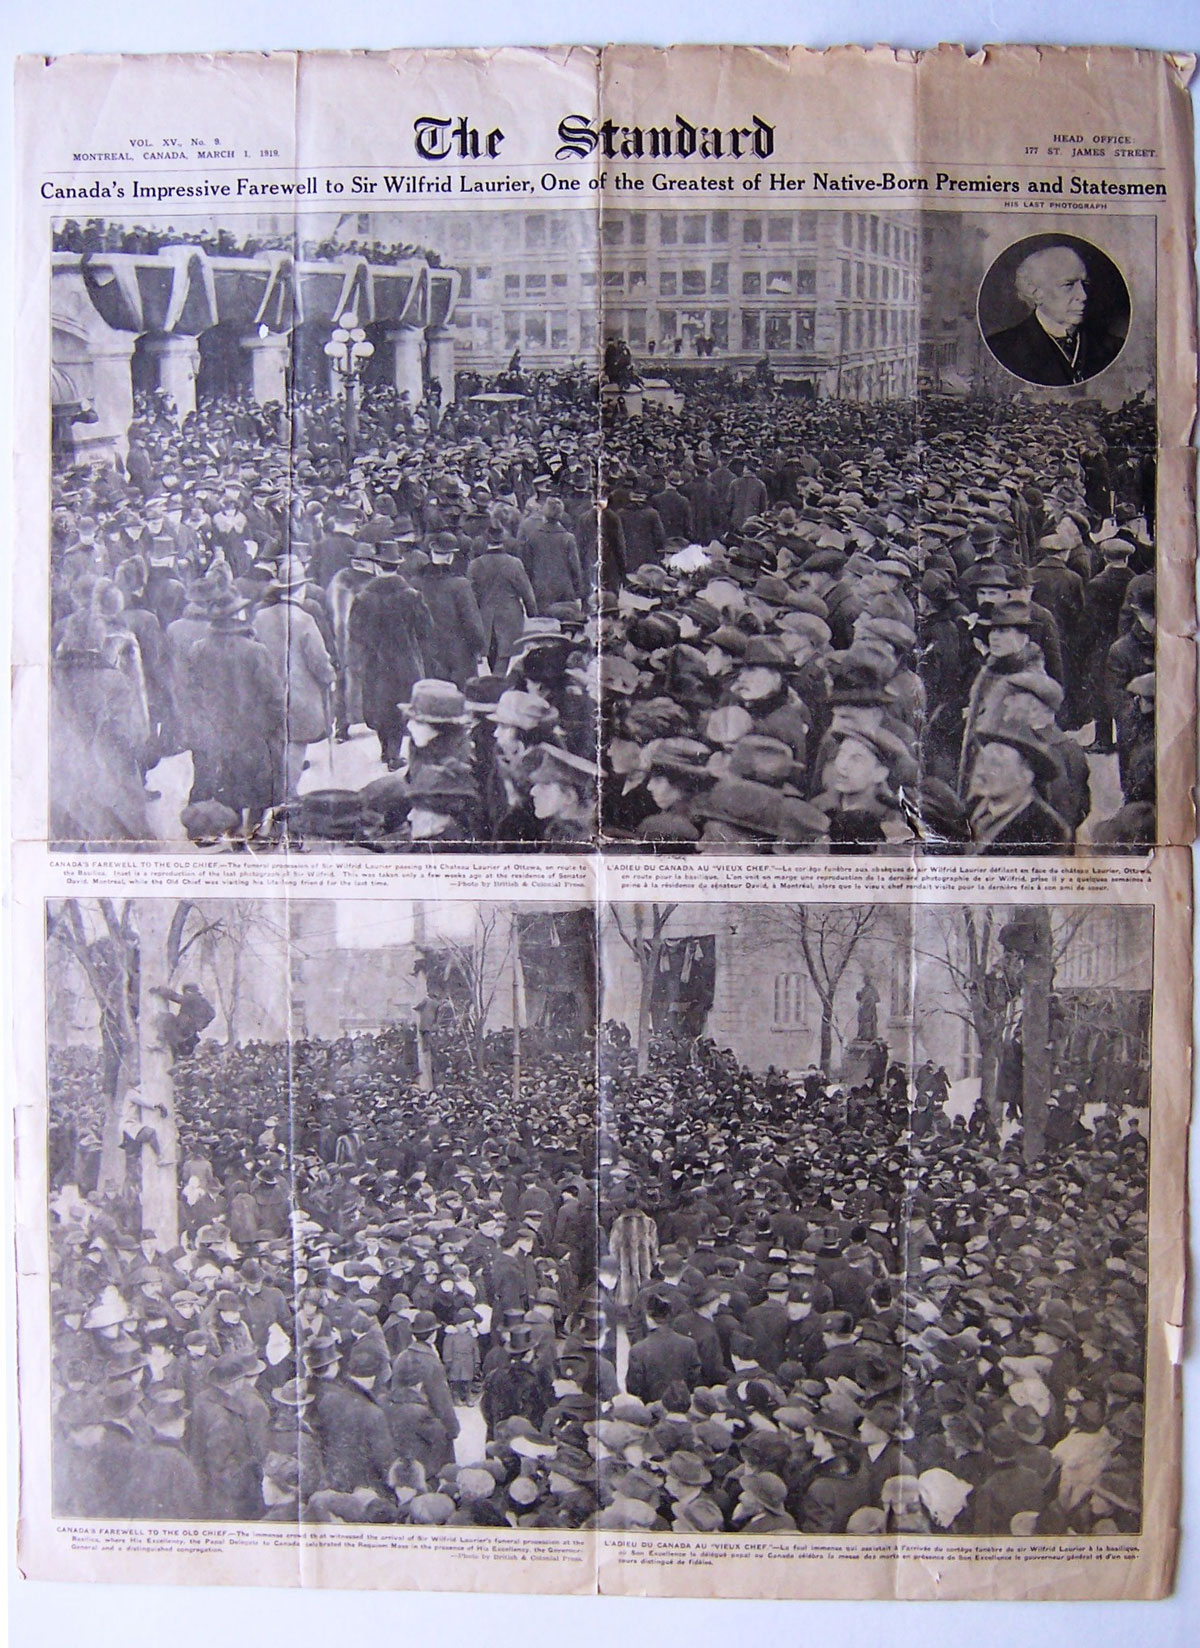 Special edition of The Standard, March 1, 1919, featuring photographs from Laurier’s funeral. Canadian Museum of History, ACQ 2012.17, temporary no. 217.2r. Gift of Serge Joyal. Photo: Xavier Gélinas, 217.2r